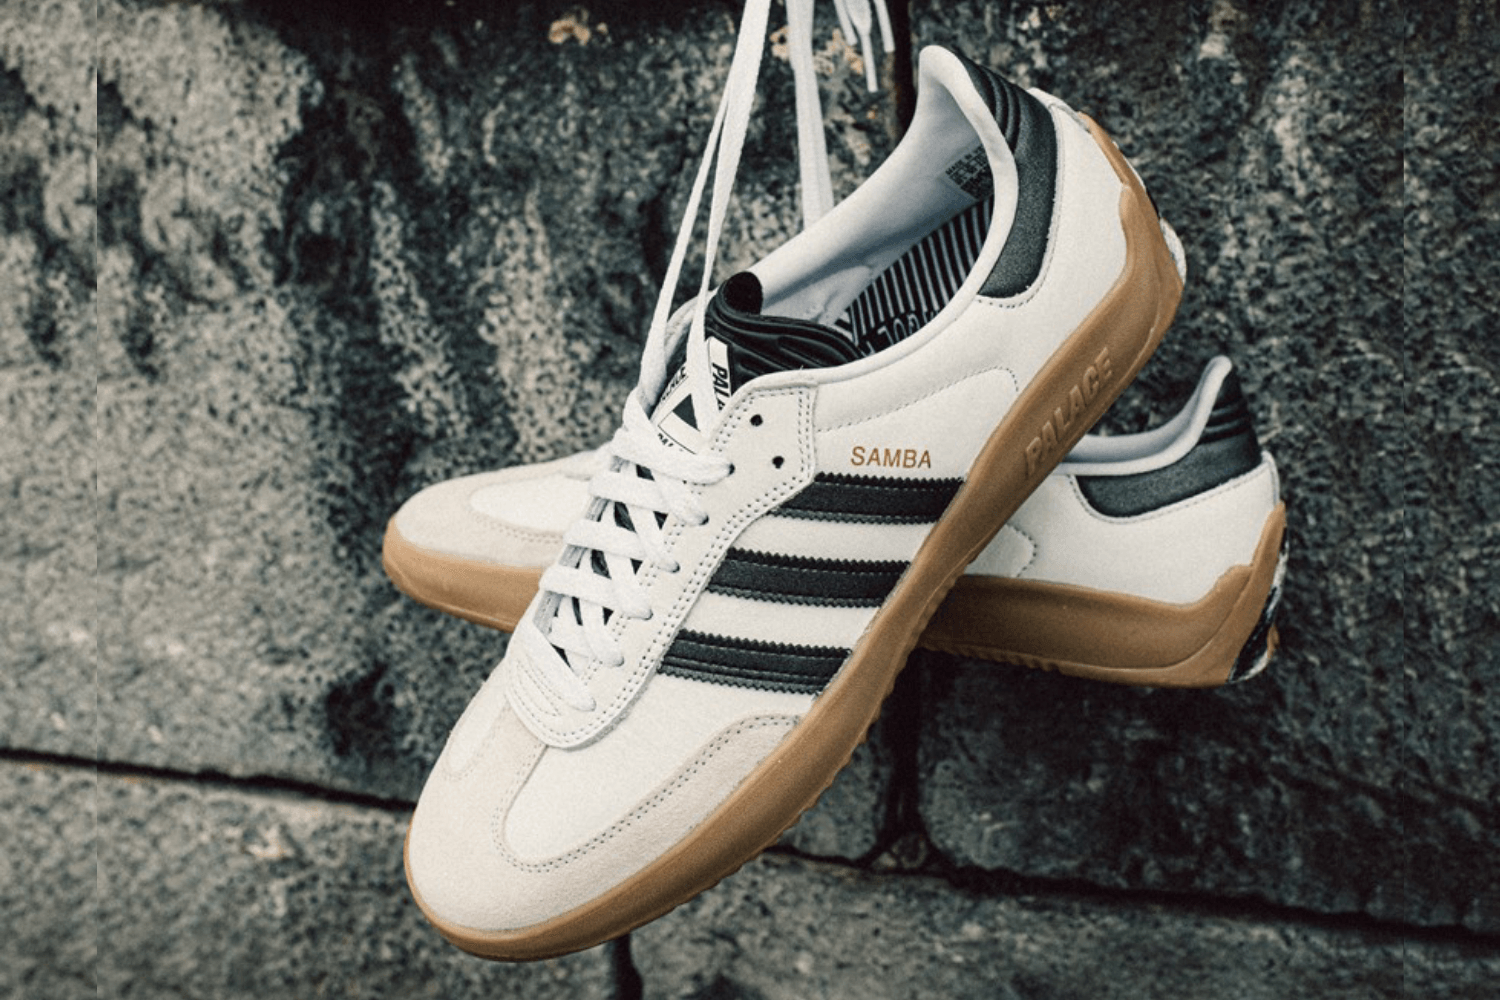 Palace and adidas release Samba colorways - Sneakerjagers